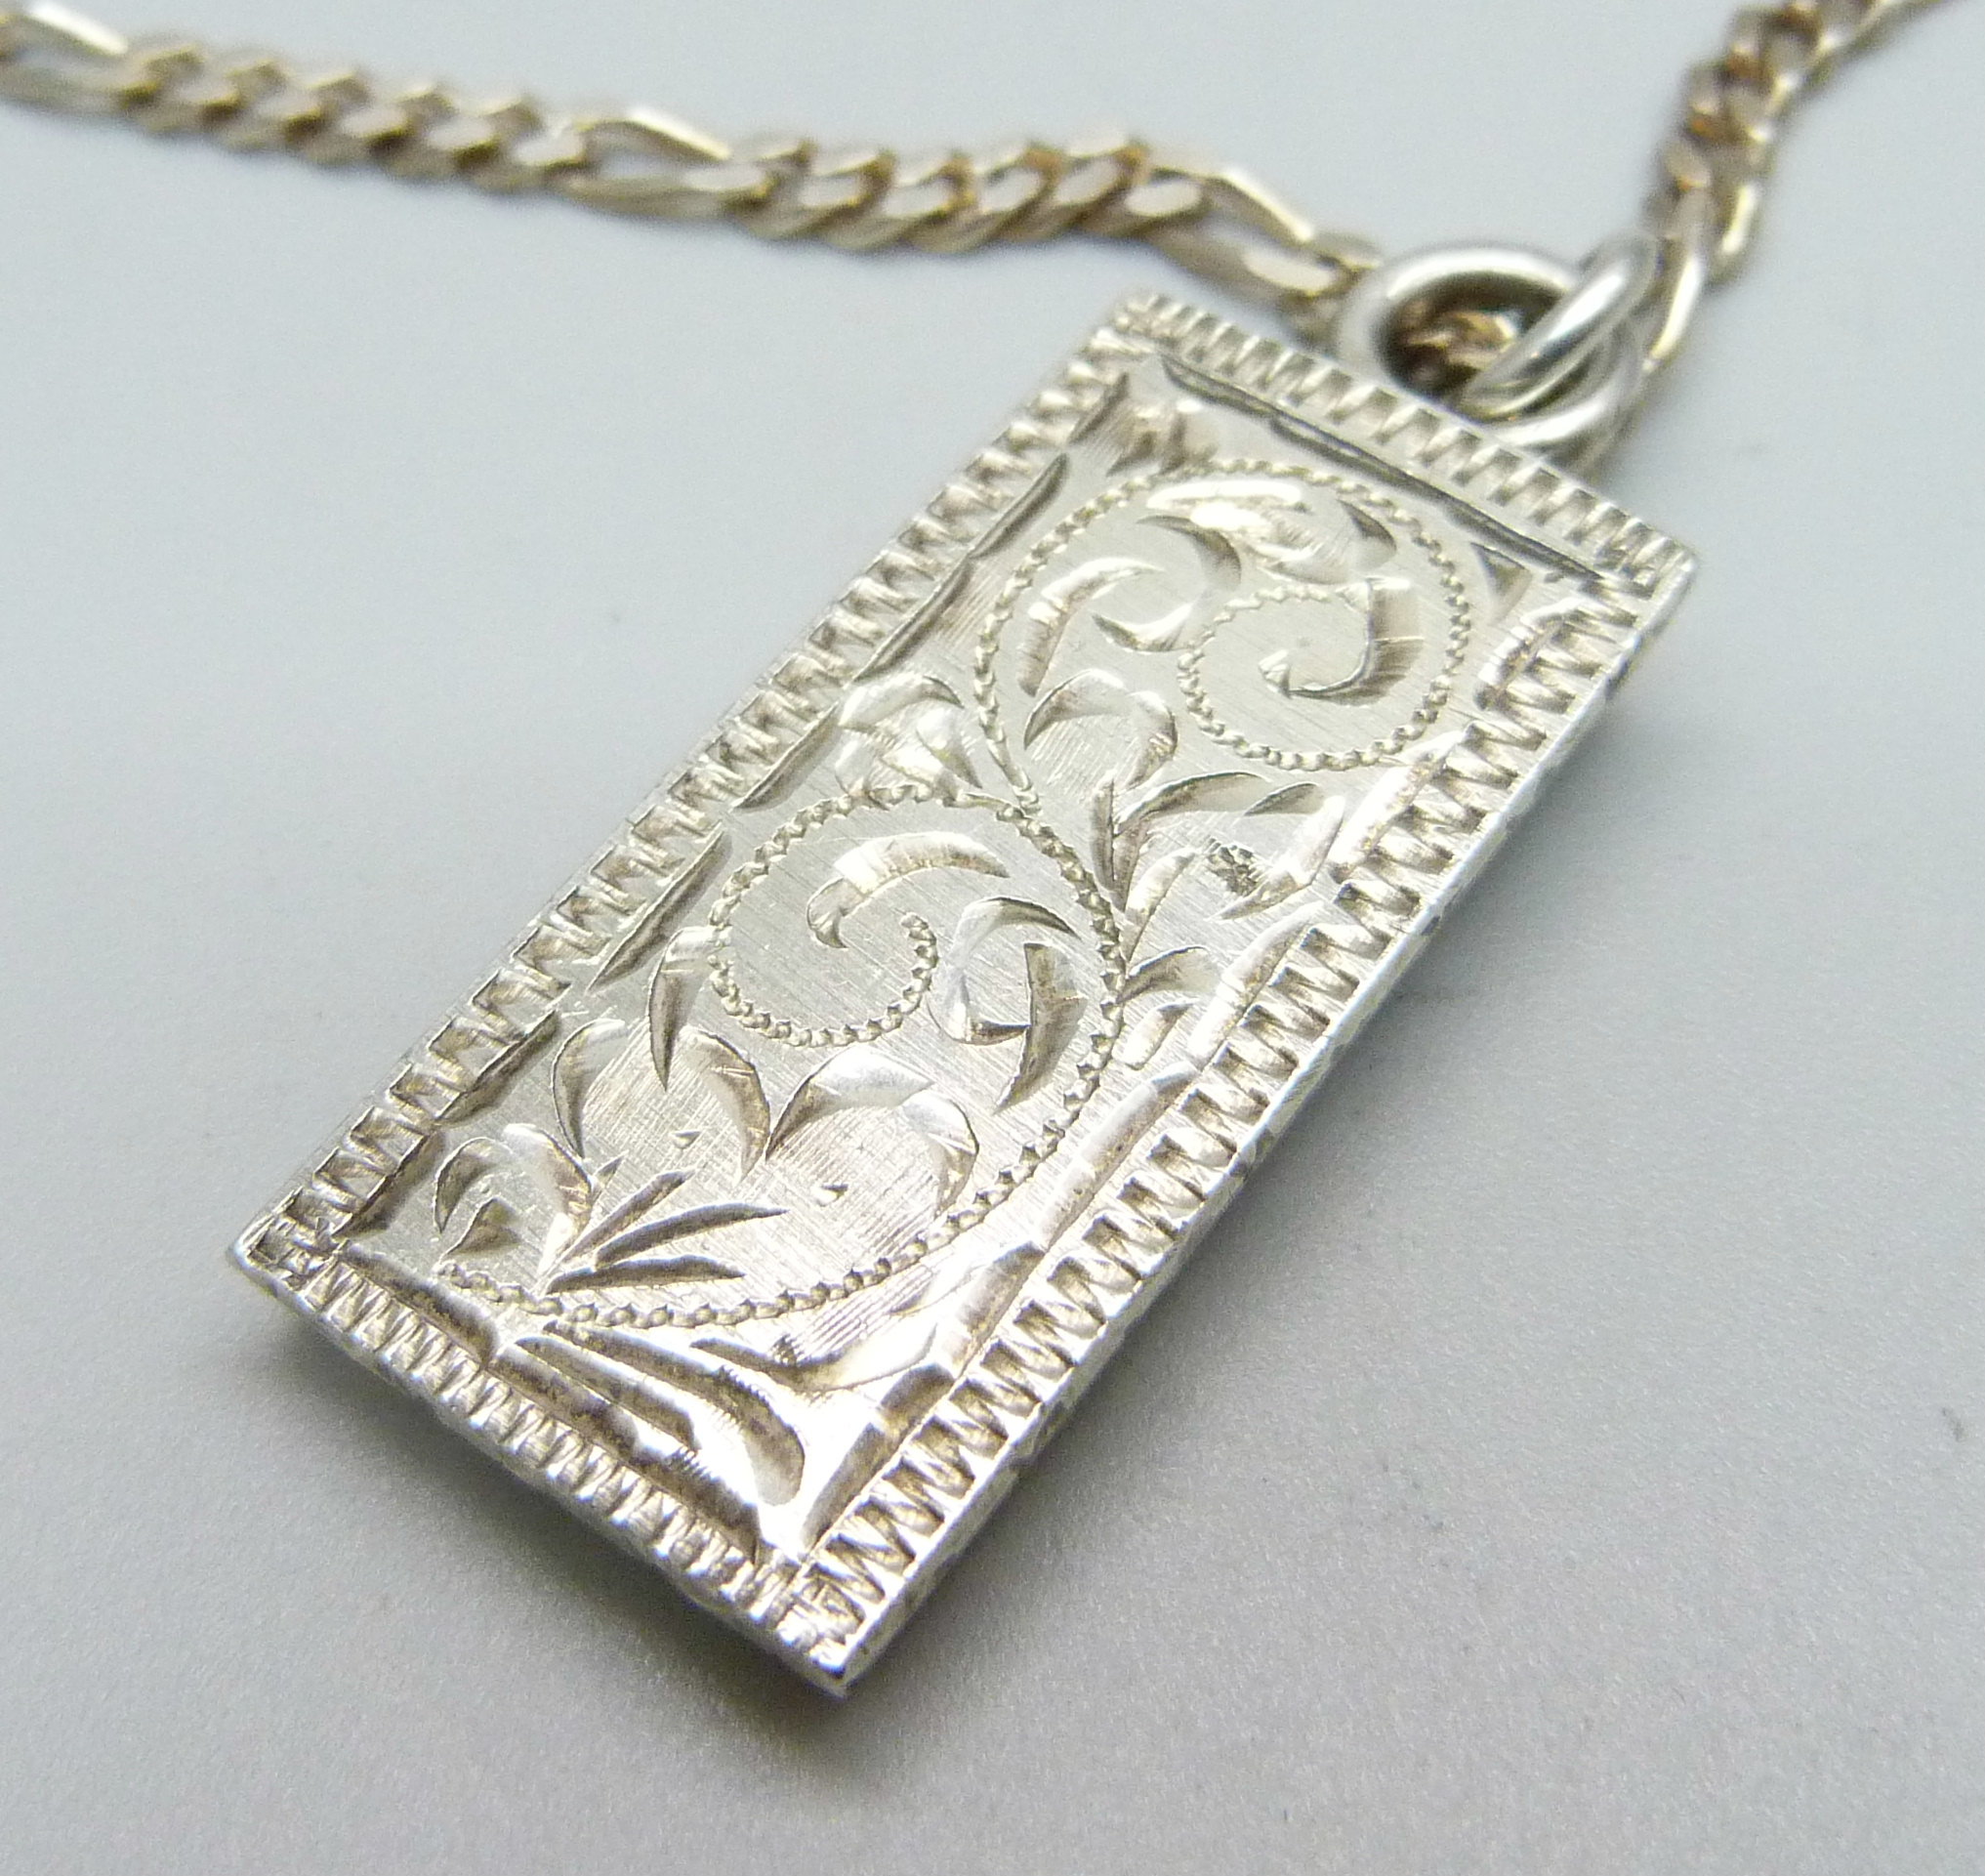 A silver ingot pendant on a silver chain, 39g, chain 59cm - Image 3 of 4